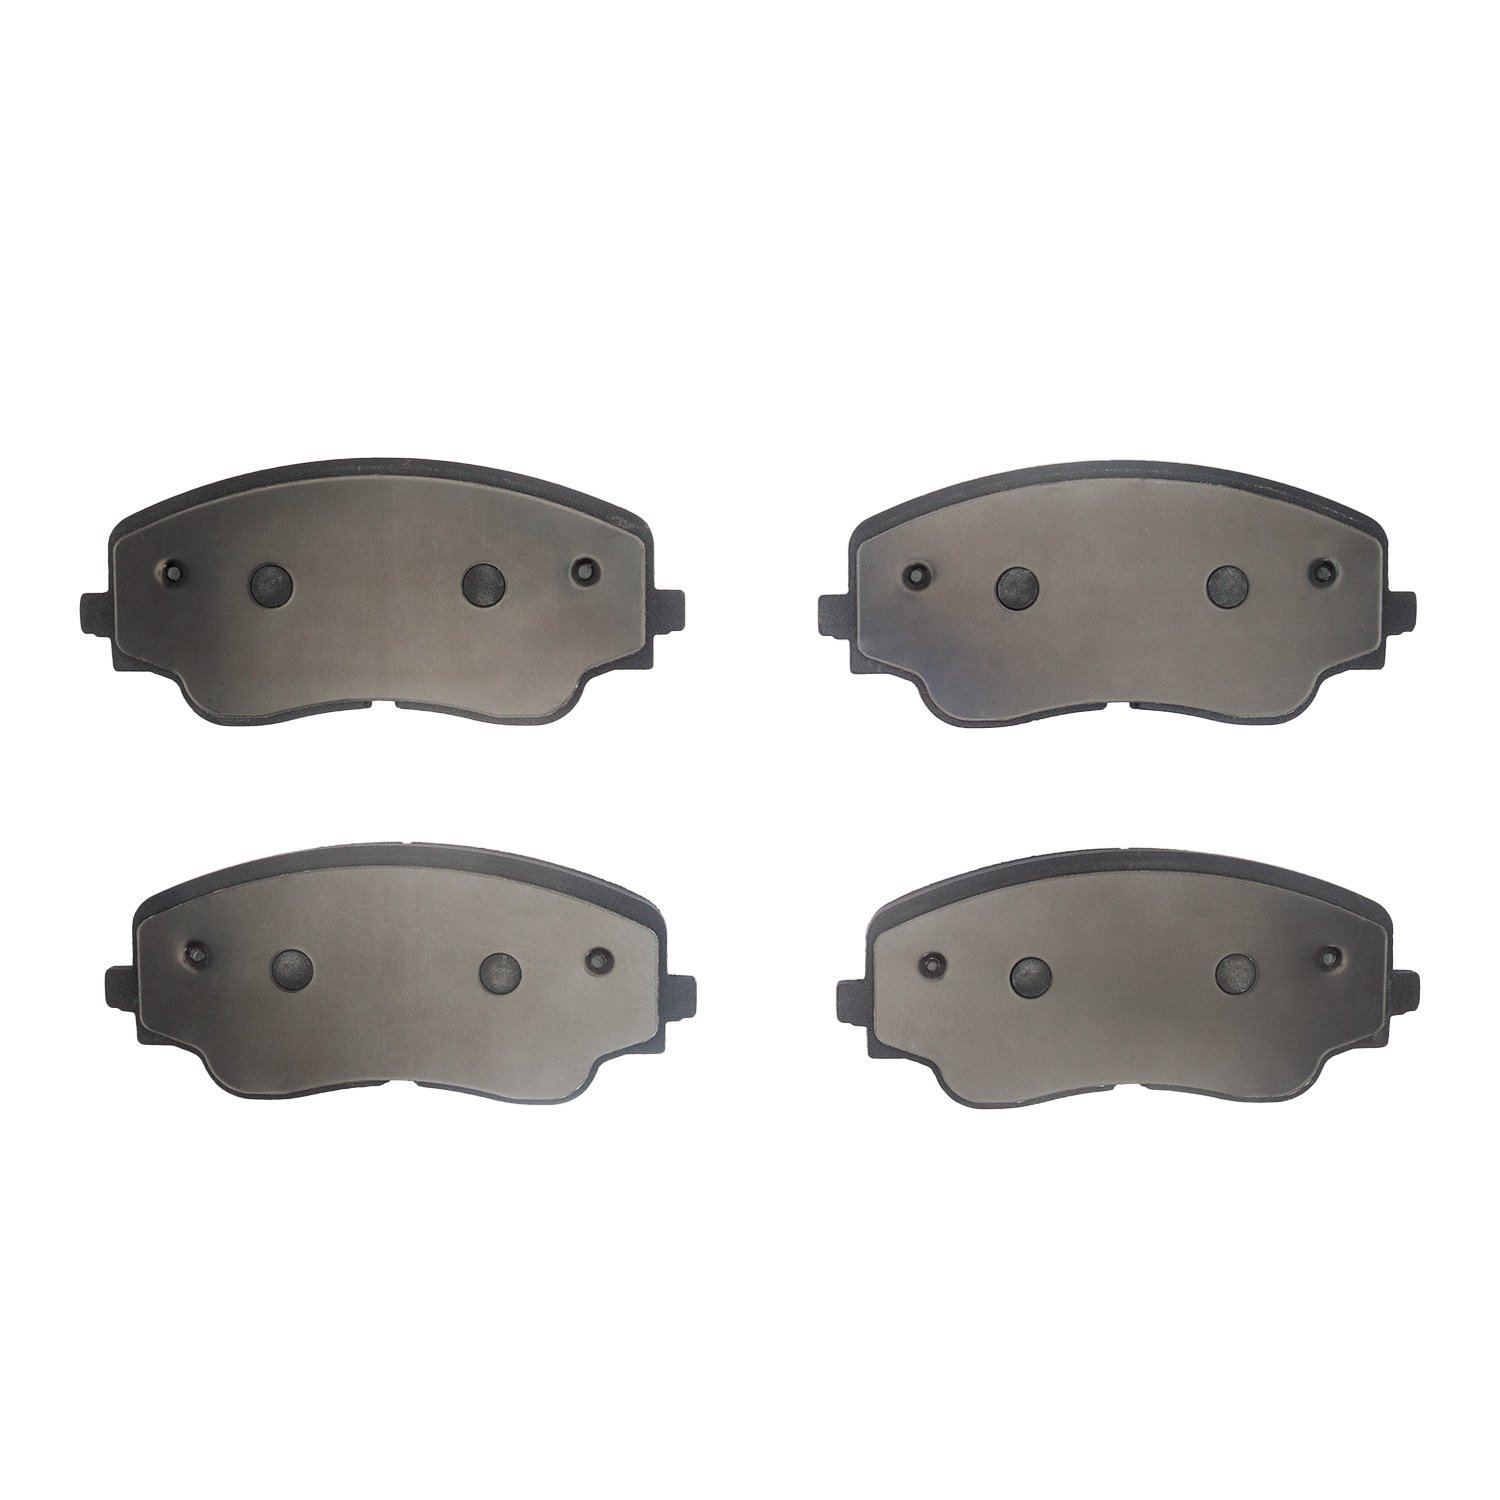 1551-2437-00 5000 Advanced Low-Metallic Brake Pads, Fits Select Audi/Volkswagen, Position: Front